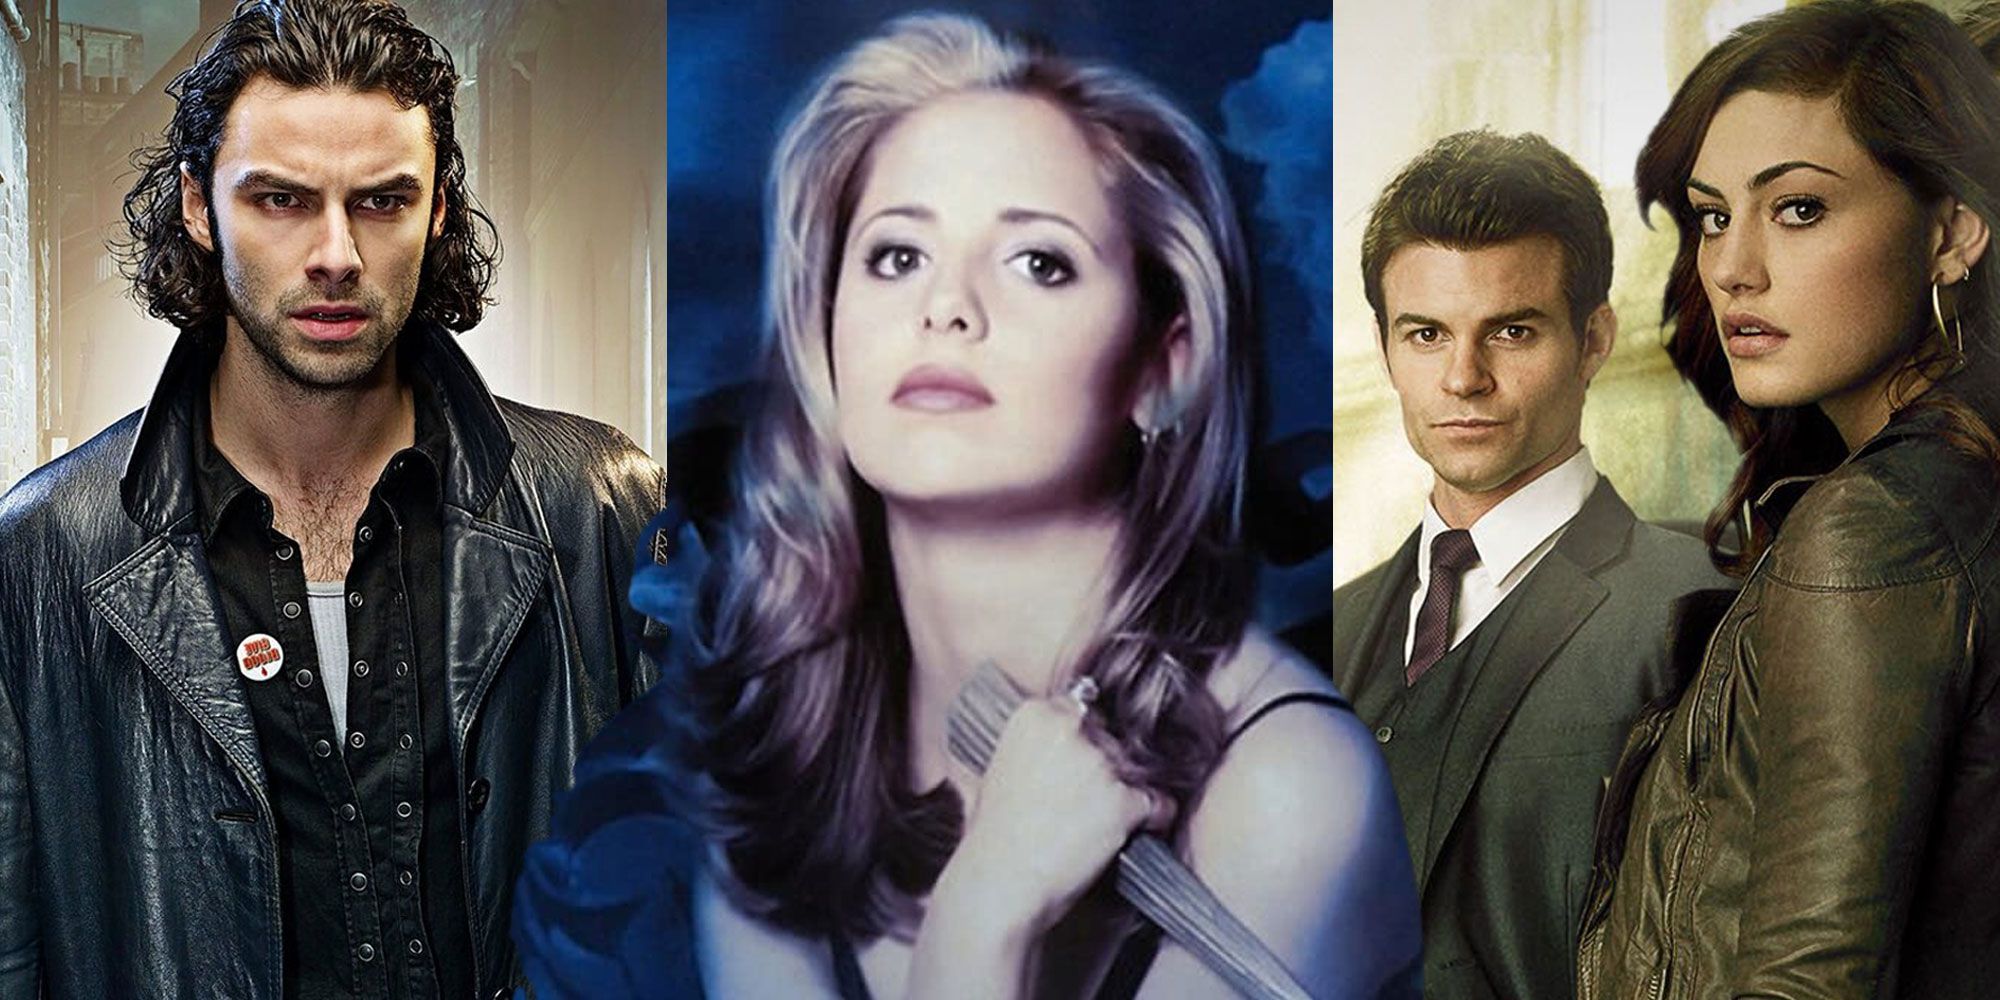 The 10 Best Vampire TV Shows, According To Ranker vlr.eng.br